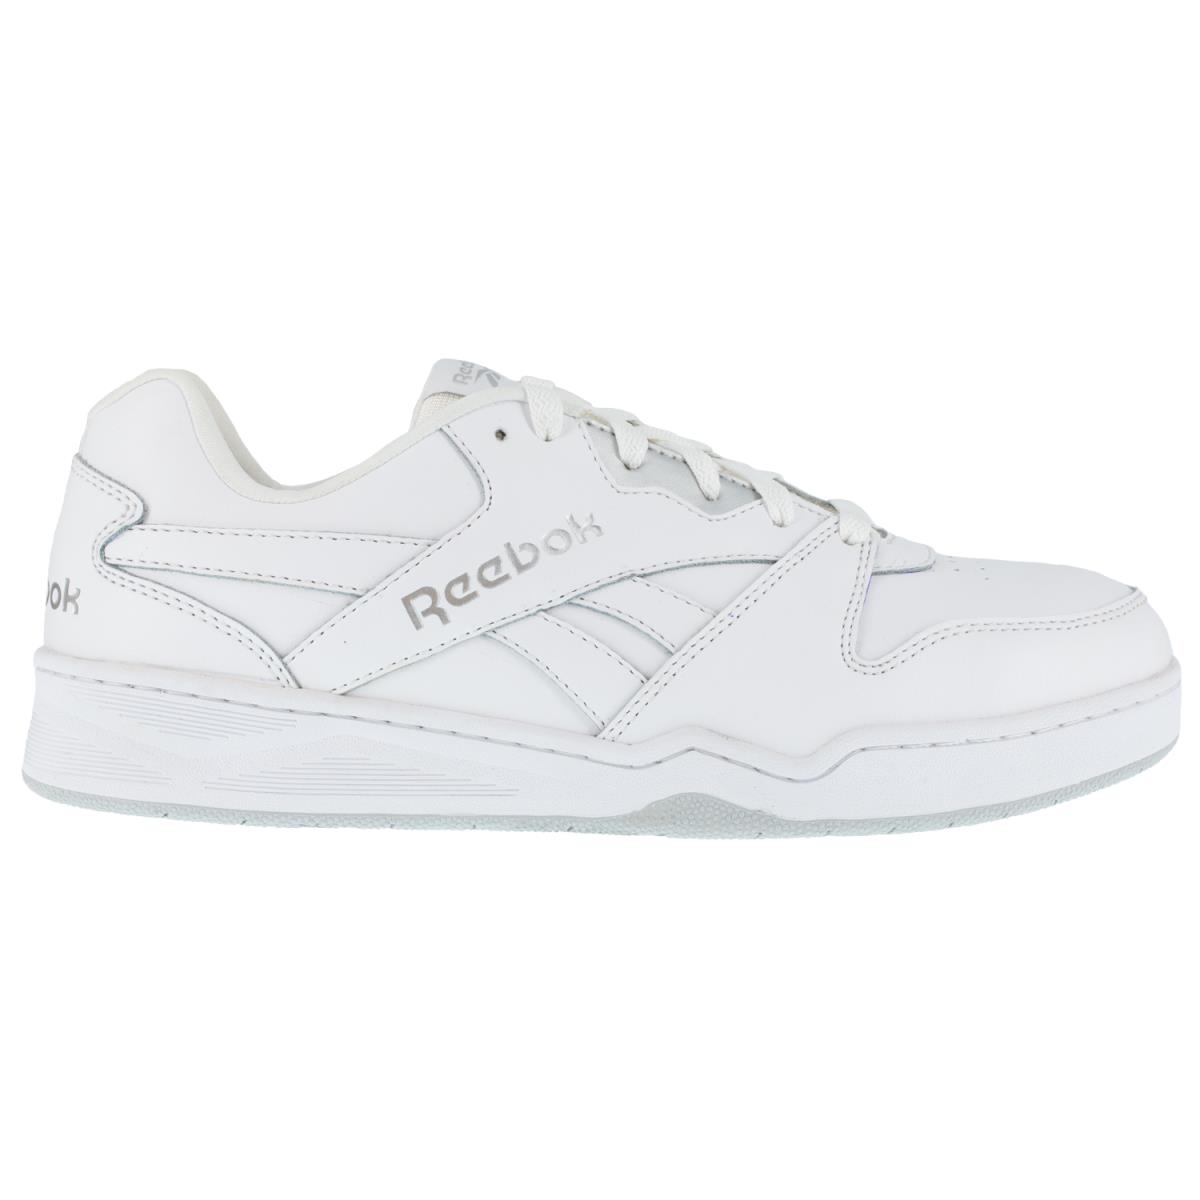 Reebok Mens White Leather Work Shoes Low Cut Sneaker CT M